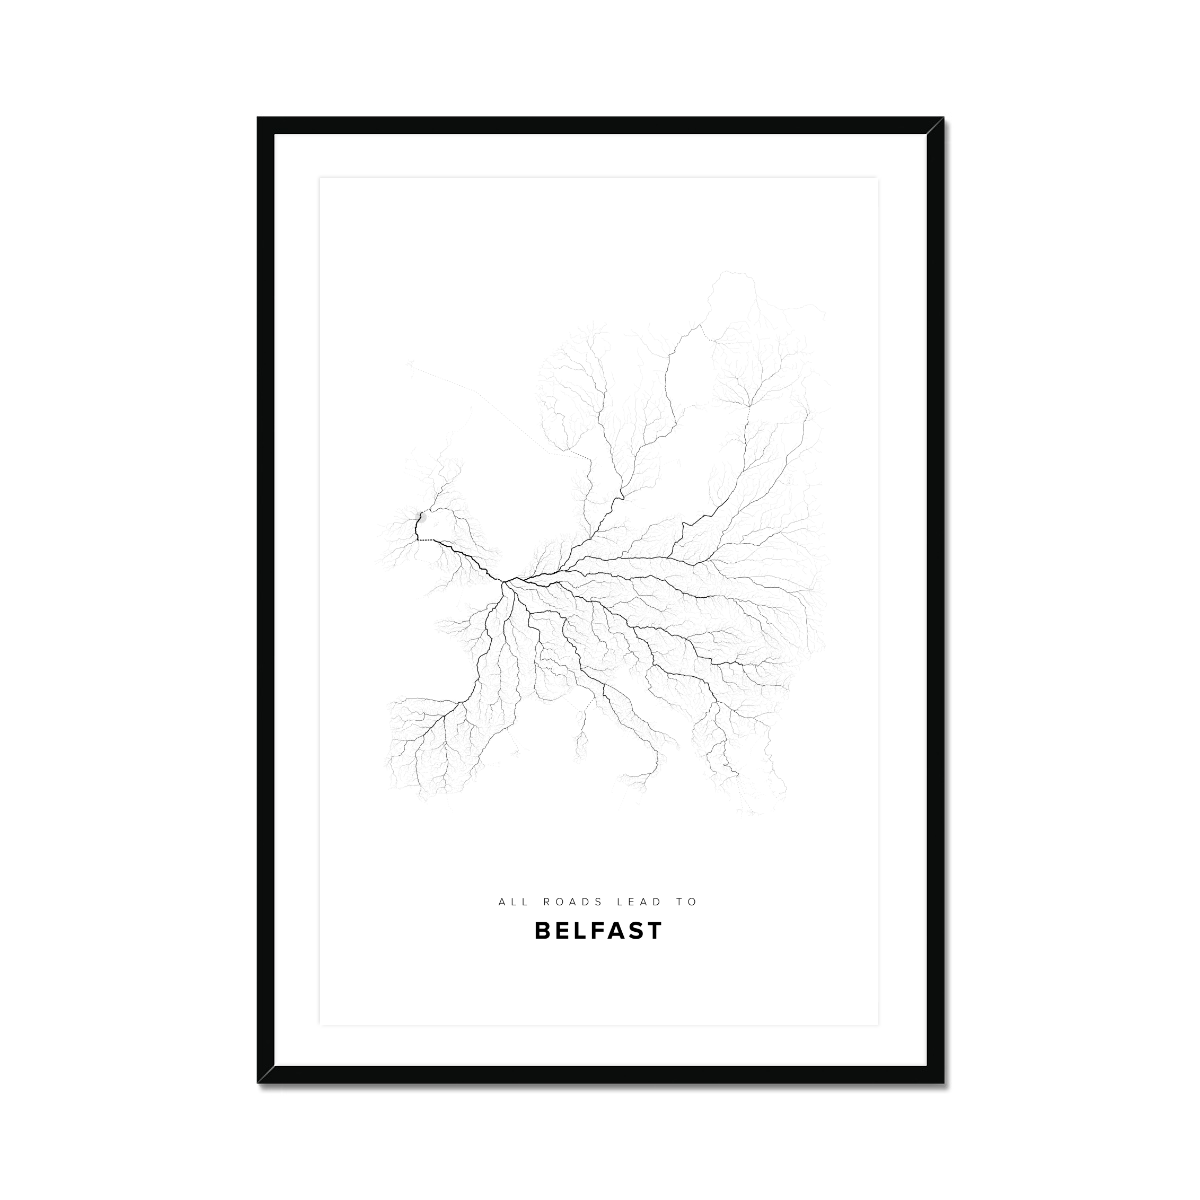 All roads lead to Belfast (United Kingdom of Great Britain and Northern Ireland) Fine Art Map Print